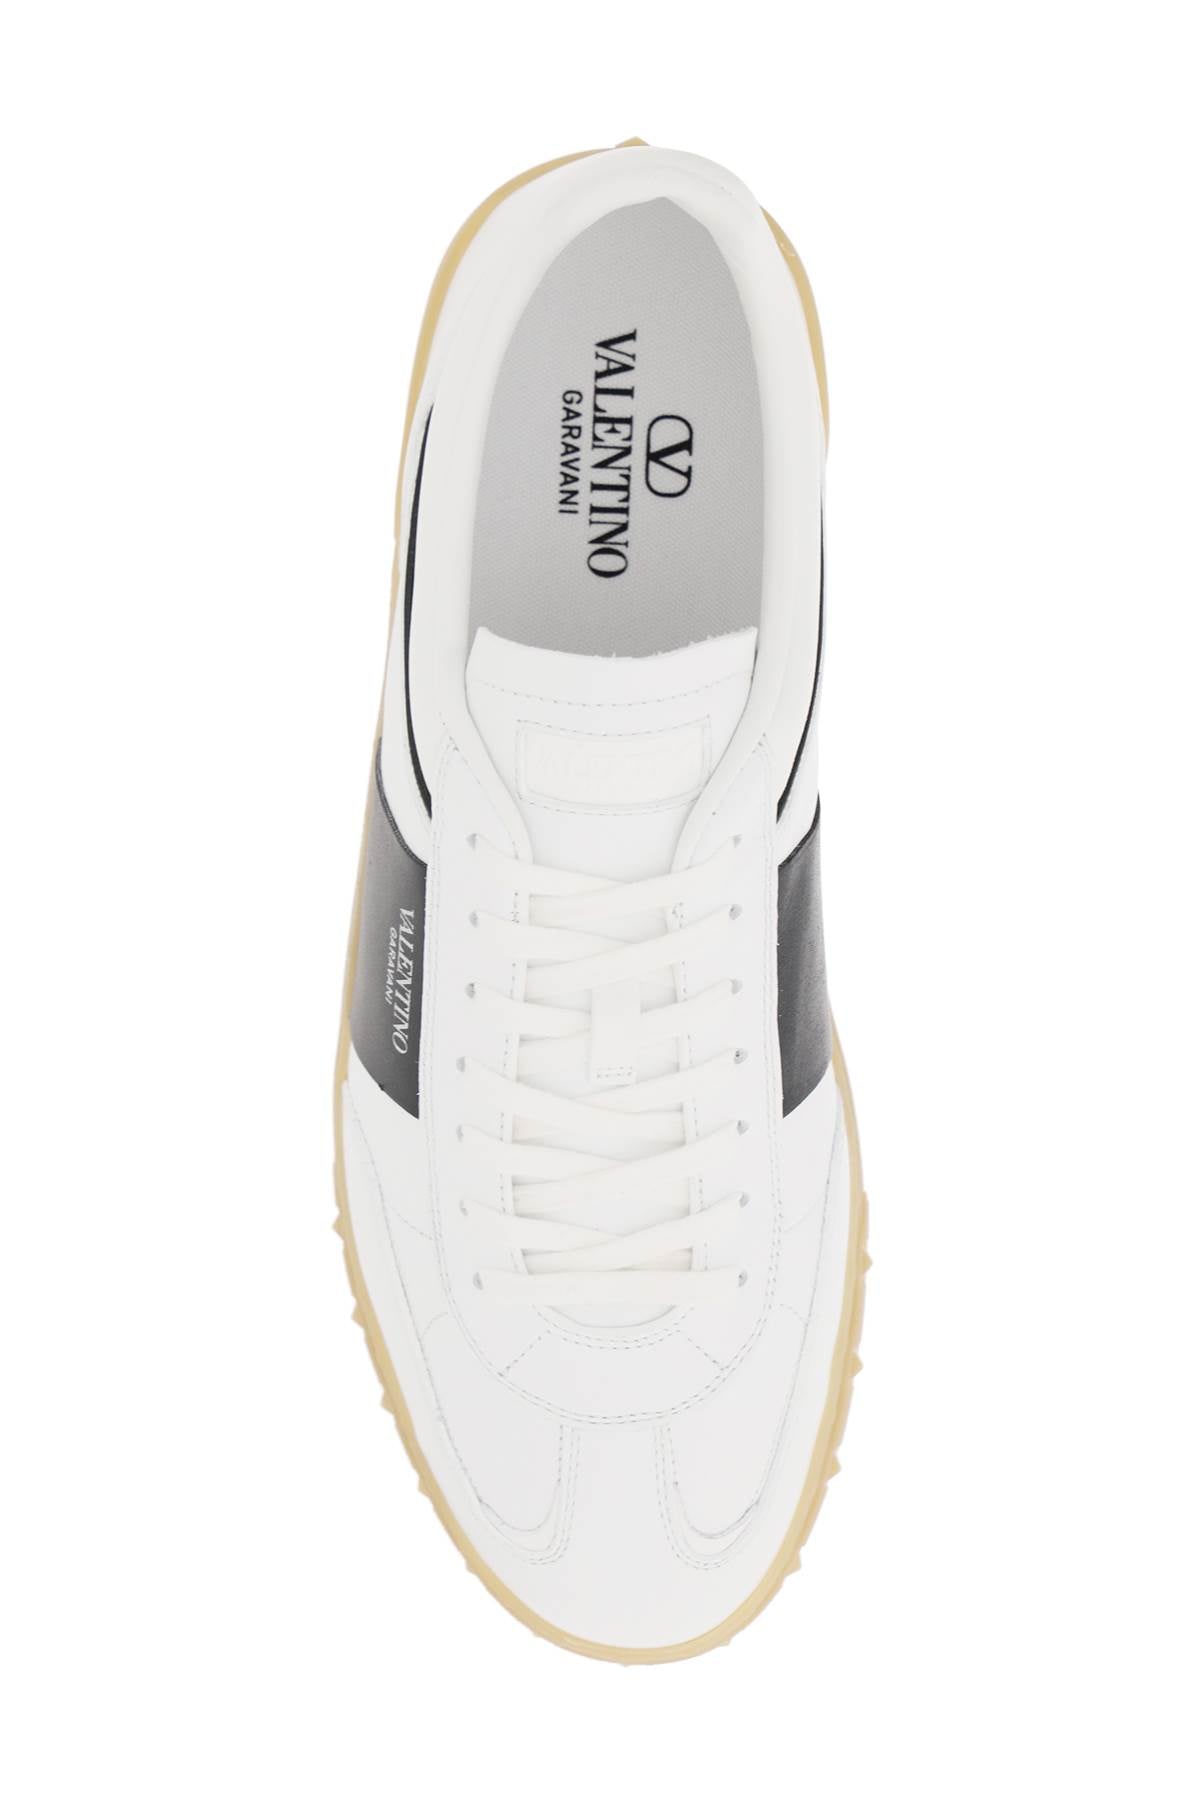 Nappa Leather Low Top Upvillage Sneakers